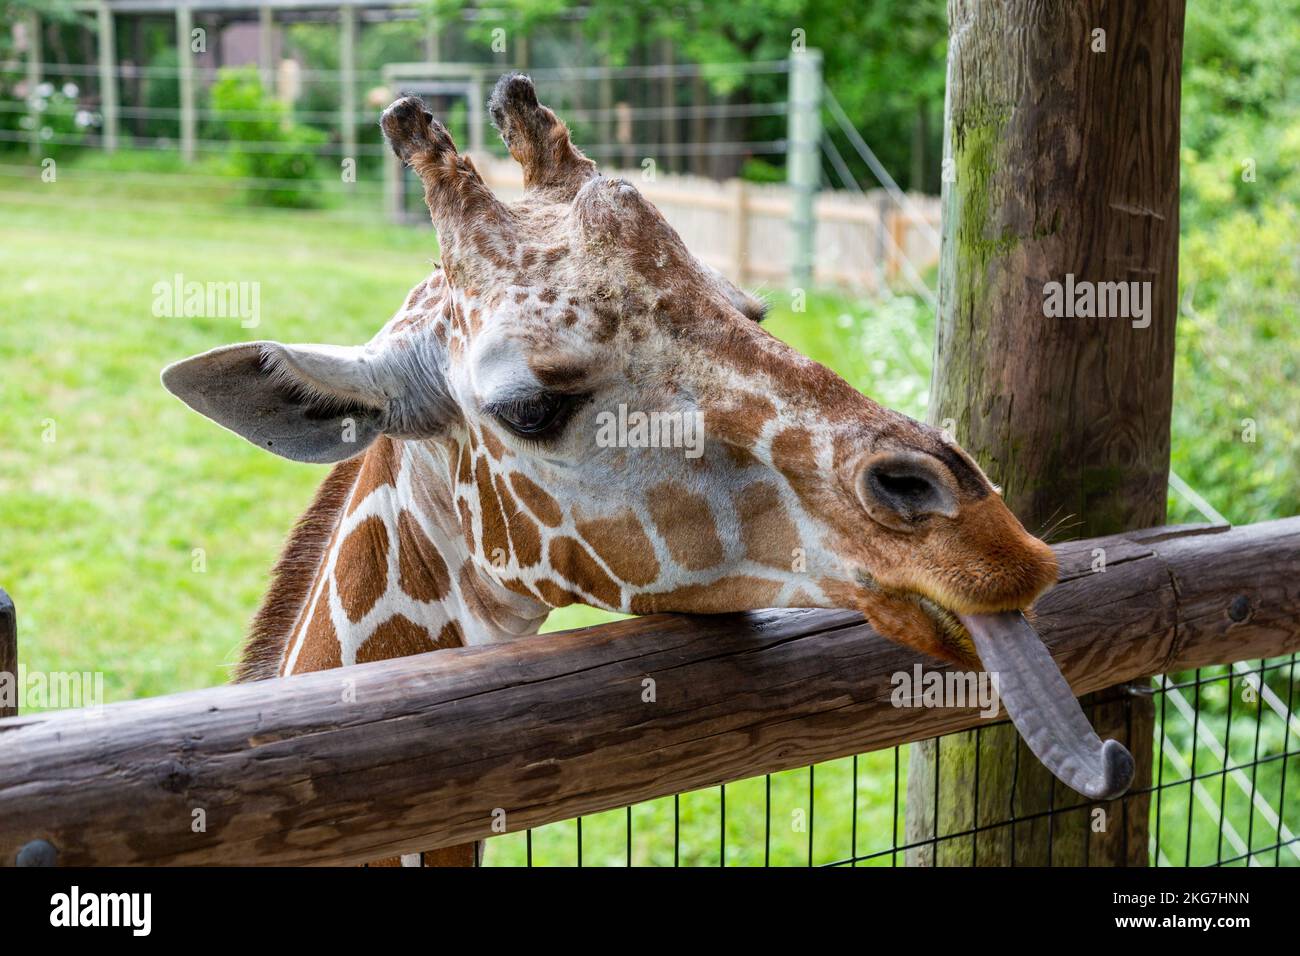 A reticulated giraffe sticks his long tongue out as peers over the fence at the Fort Wayne Children's Zoo in Fort Wayne, Indiana, USA. Stock Photo